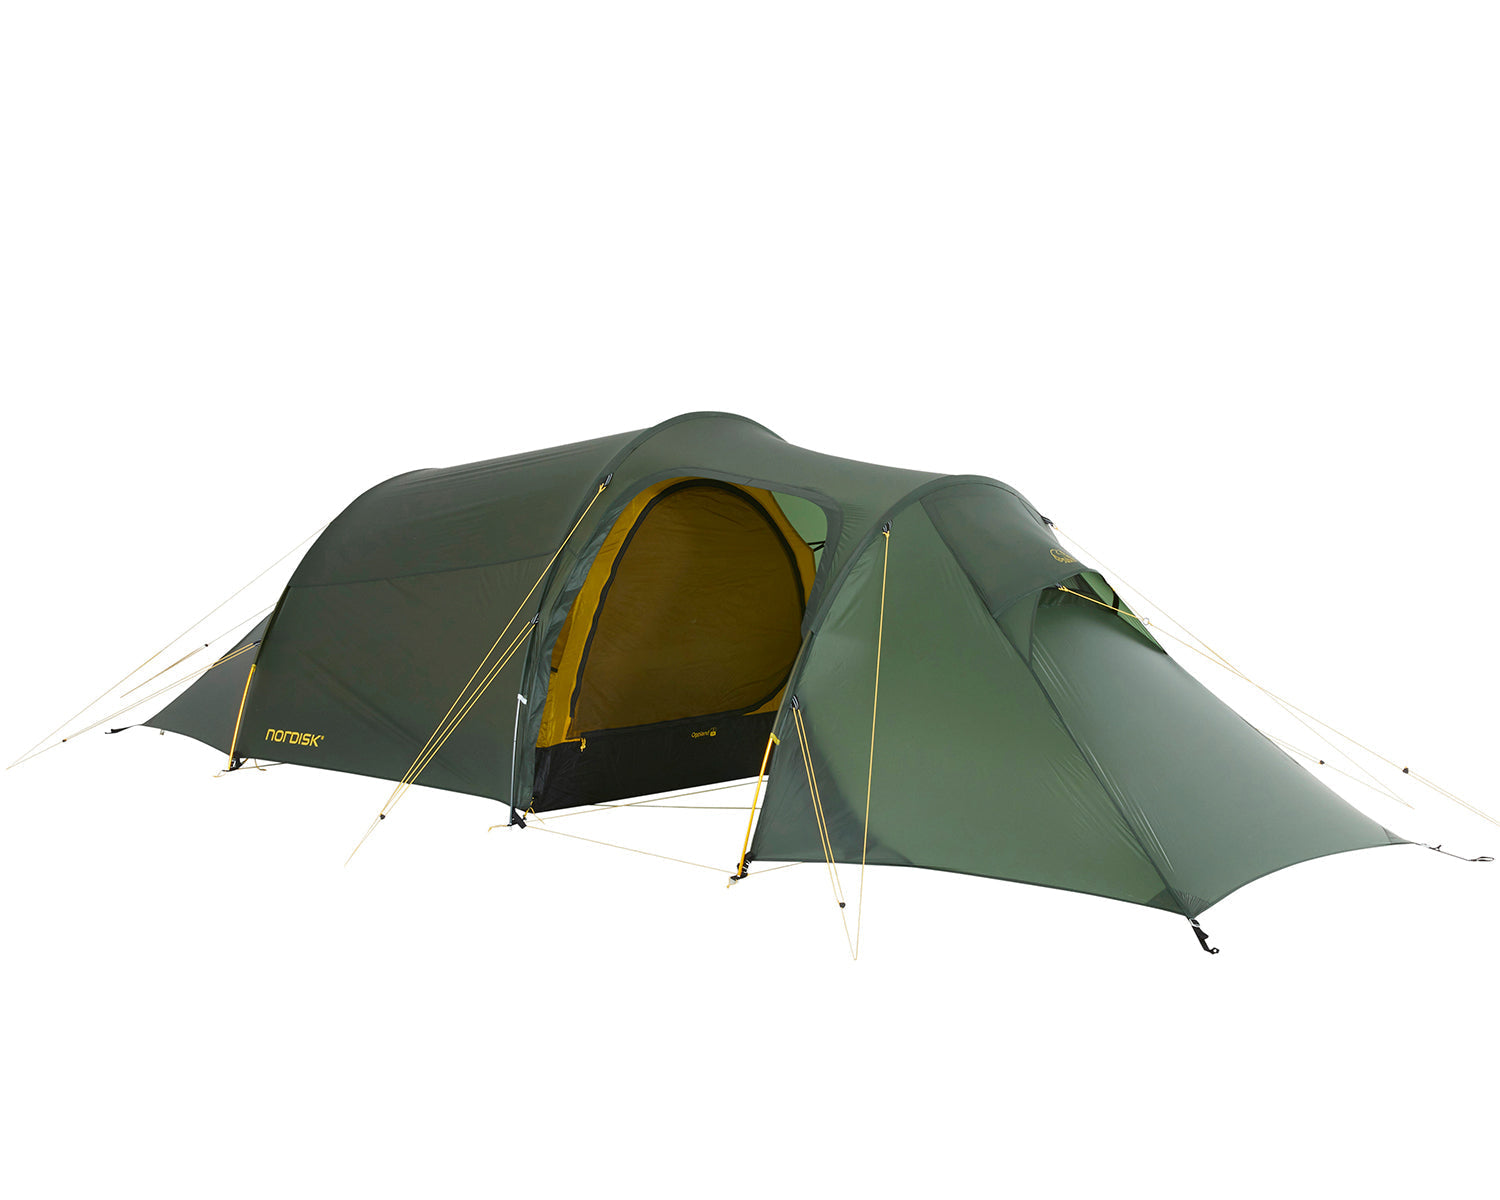 Oppland 2 LW tent - 2 person - Forest Green